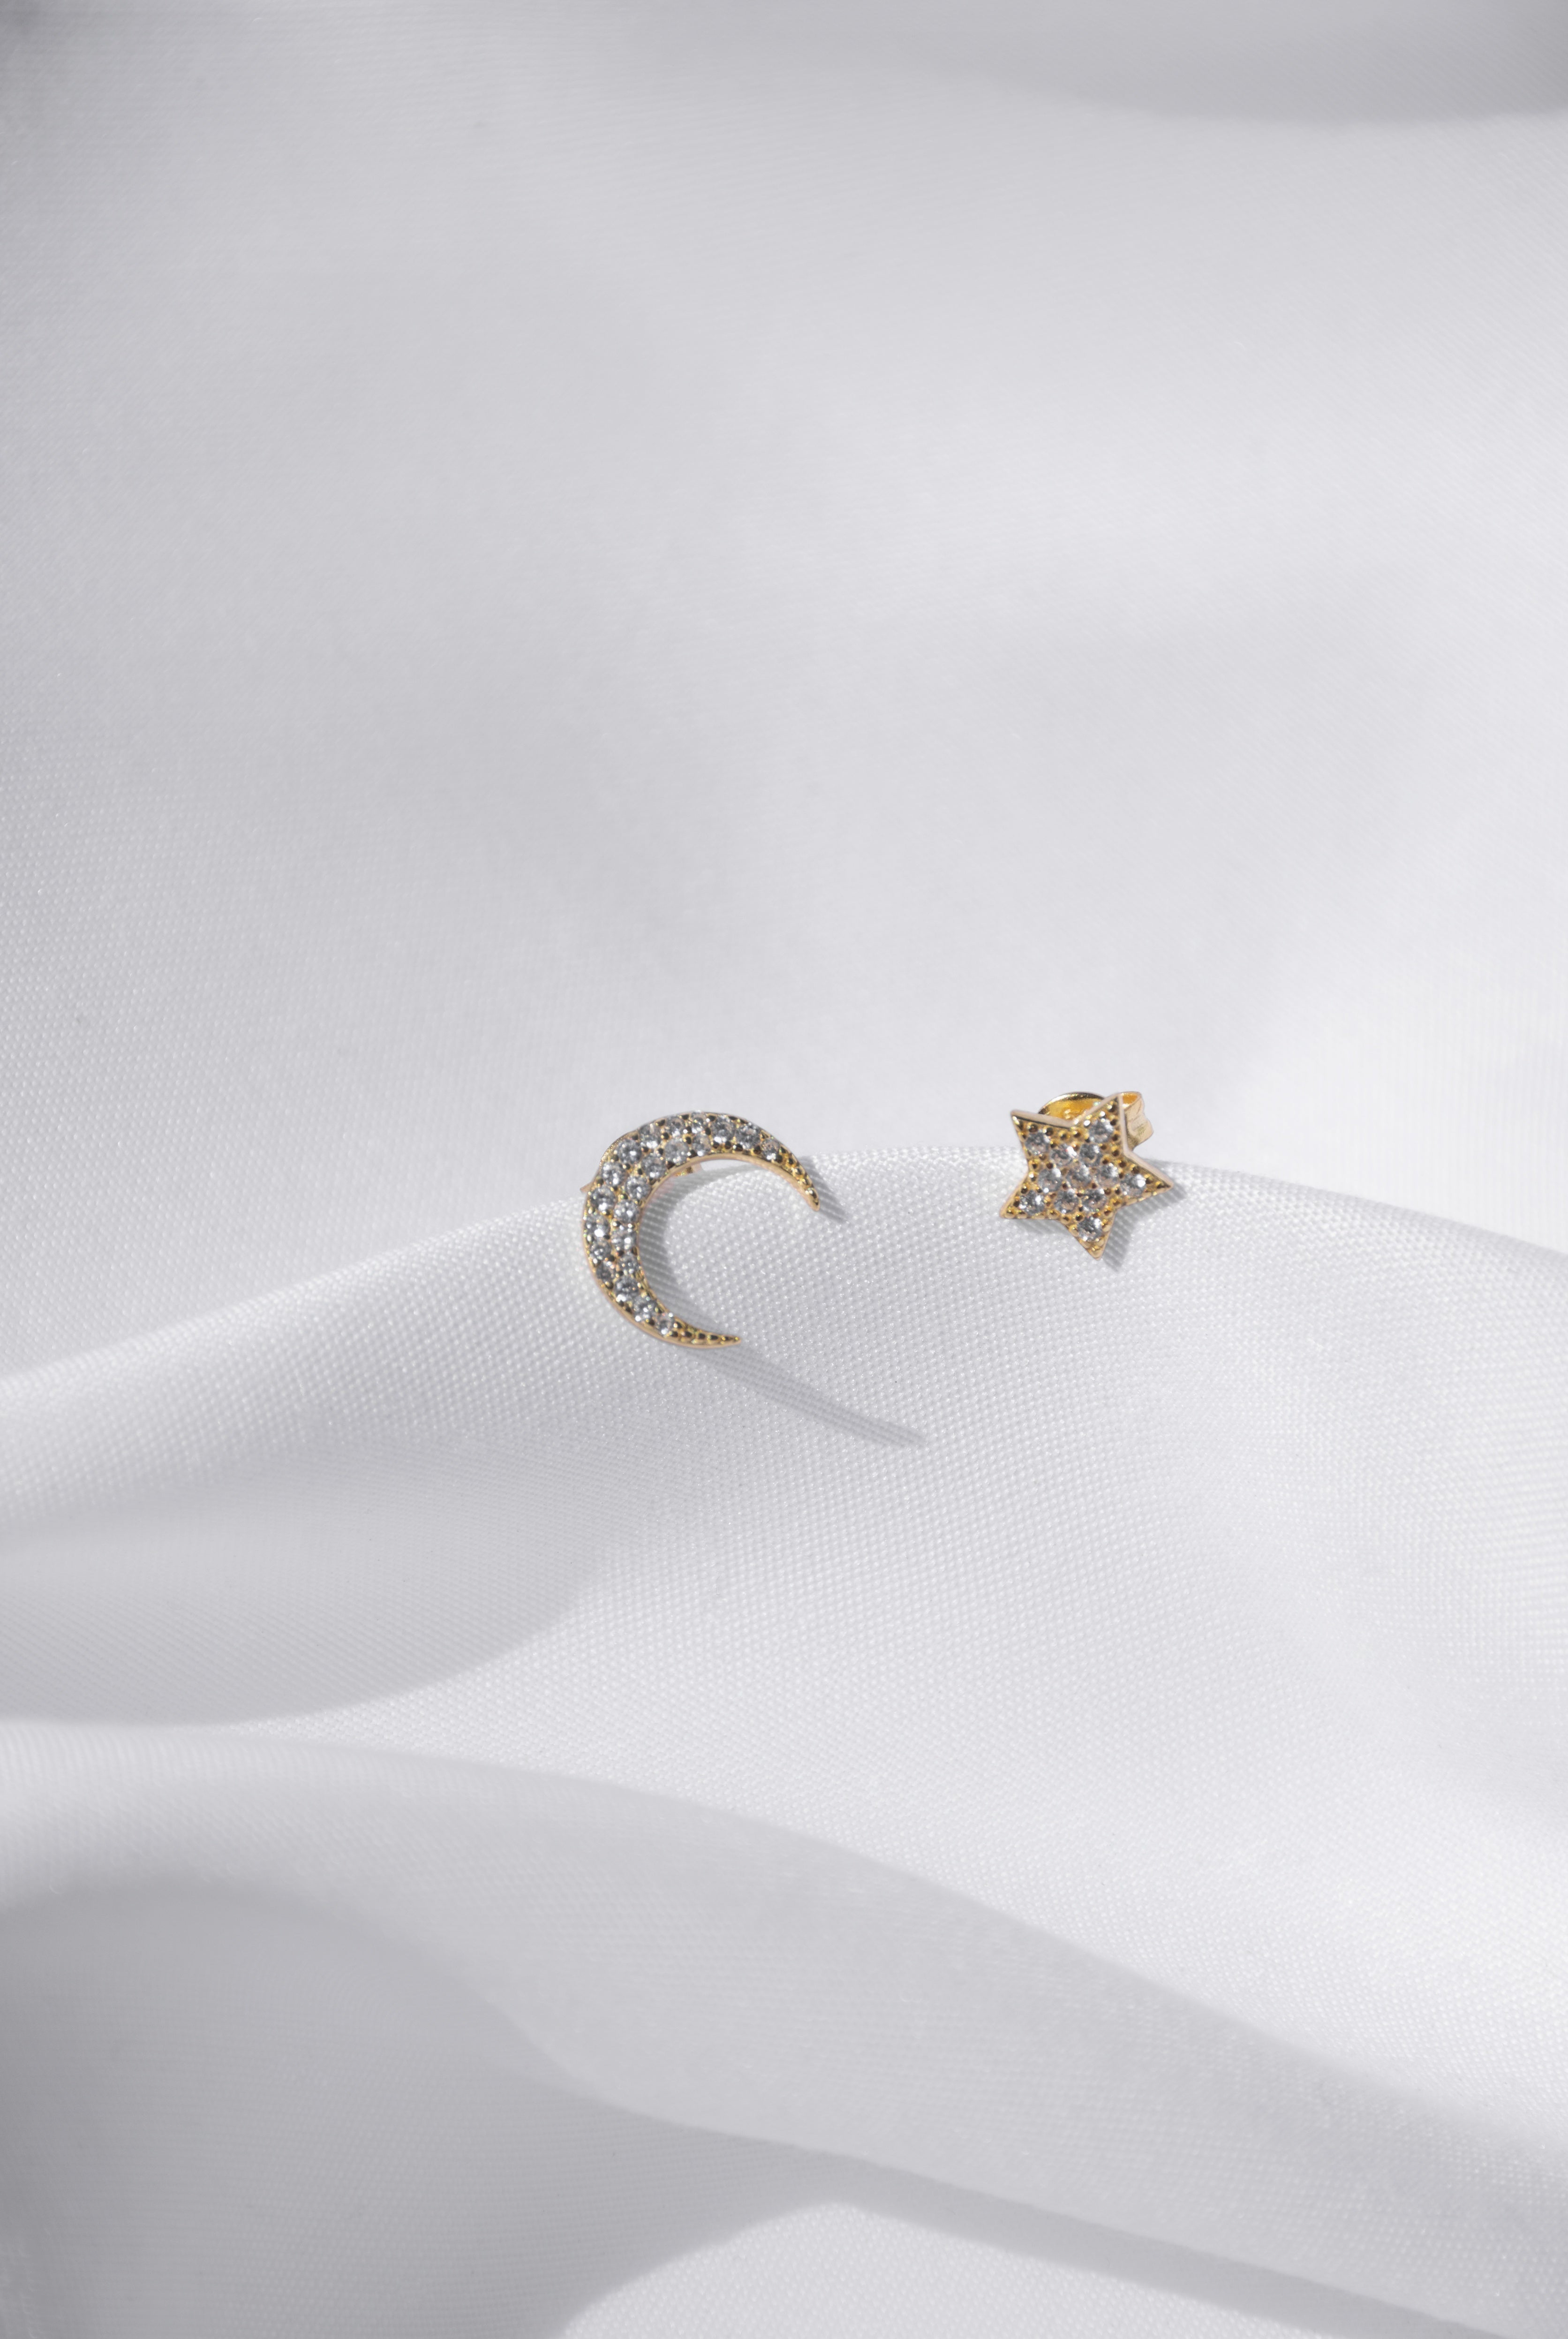 STAR AND MOON || STUD EARRING